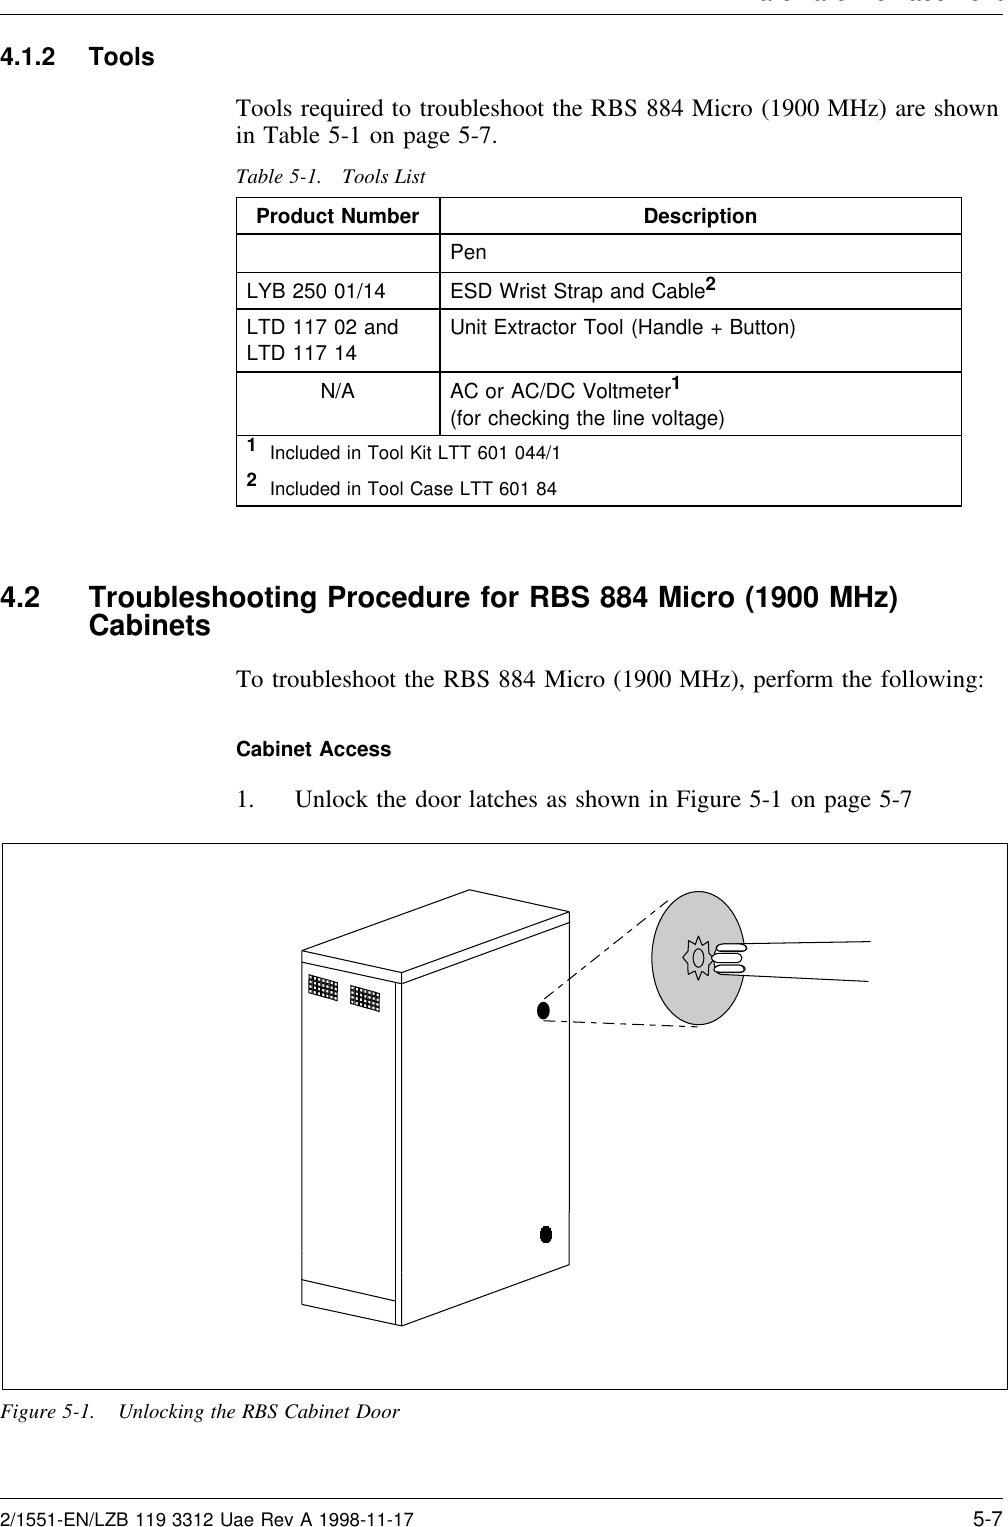 Hardware Re lacement4.1.2 ToolsTools required to troubleshoot the RBS 884 Micro (1900 MHz) are shownin Table 5-1 on page 5-7.Table 5-1. Tools ListProduct Number DescriptionPenLYB 250 01/14 ESD Wrist Strap and Cable2LTD 117 02 andLTD 117 14Unit Extractor Tool (Handle + Button)N/A AC or AC/DC Voltmeter1(for checking the line voltage)1Included in Tool Kit LTT 601 044/12Included in Tool Case LTT 601 844.2 Troubleshooting Procedure for RBS 884 Micro (1900 MHz)CabinetsTo troubleshoot the RBS 884 Micro (1900 MHz), perform the following:Cabinet Access1. Unlock the door latches as shown in Figure 5-1 on page 5-7Figure 5-1. Unlocking the RBS Cabinet Door2/1551-EN/LZB 119 3312 Uae Rev A 1998-11-17 5-7